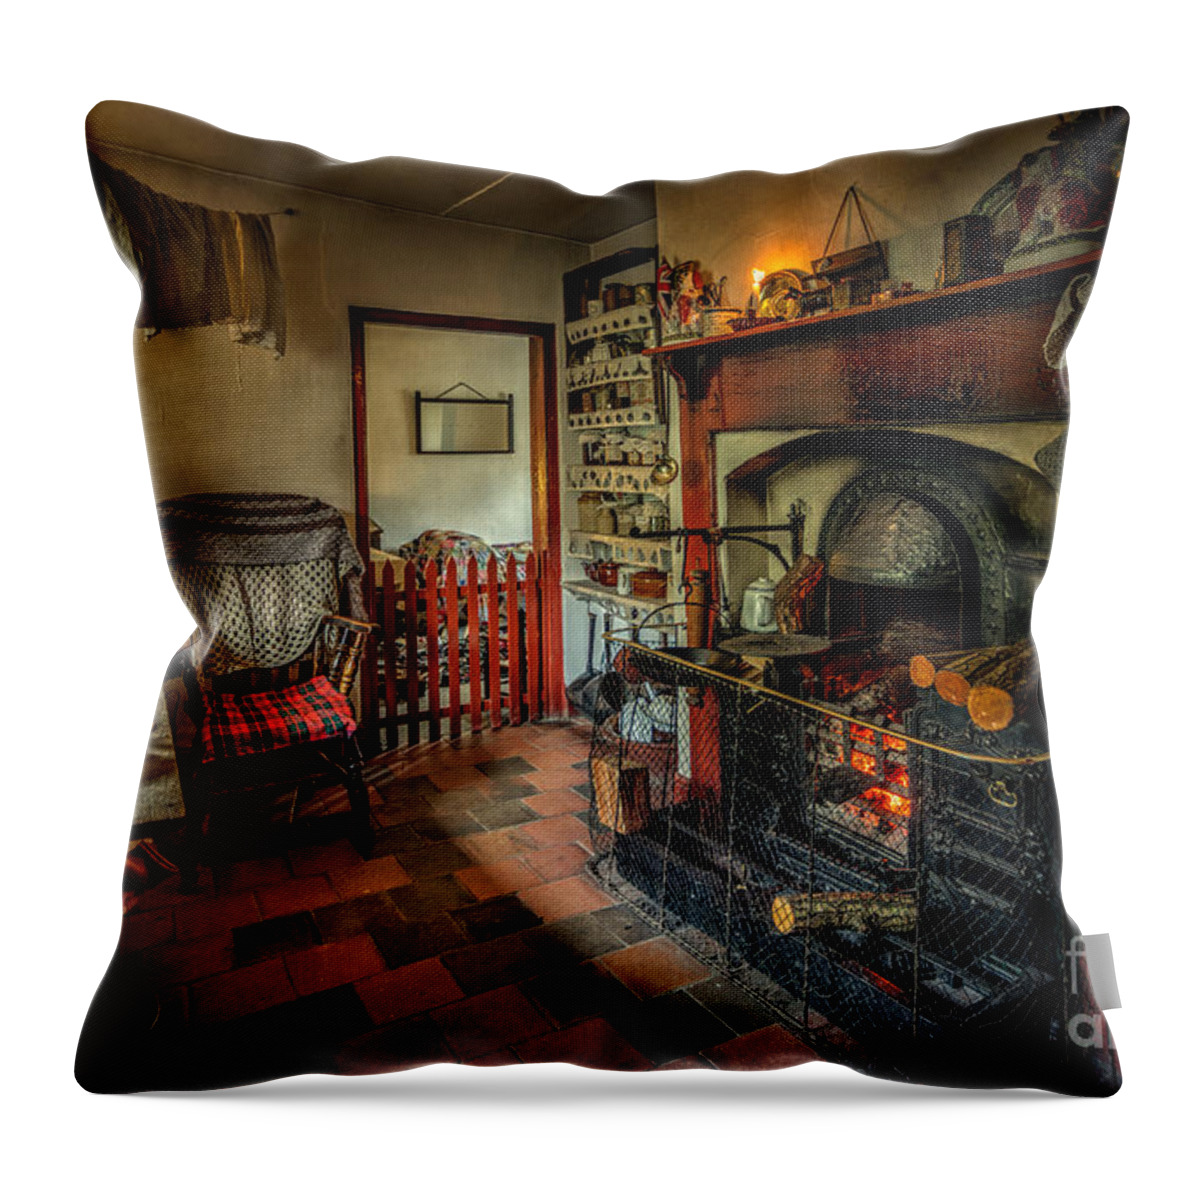 British Throw Pillow featuring the photograph Victorian Fire Place by Adrian Evans